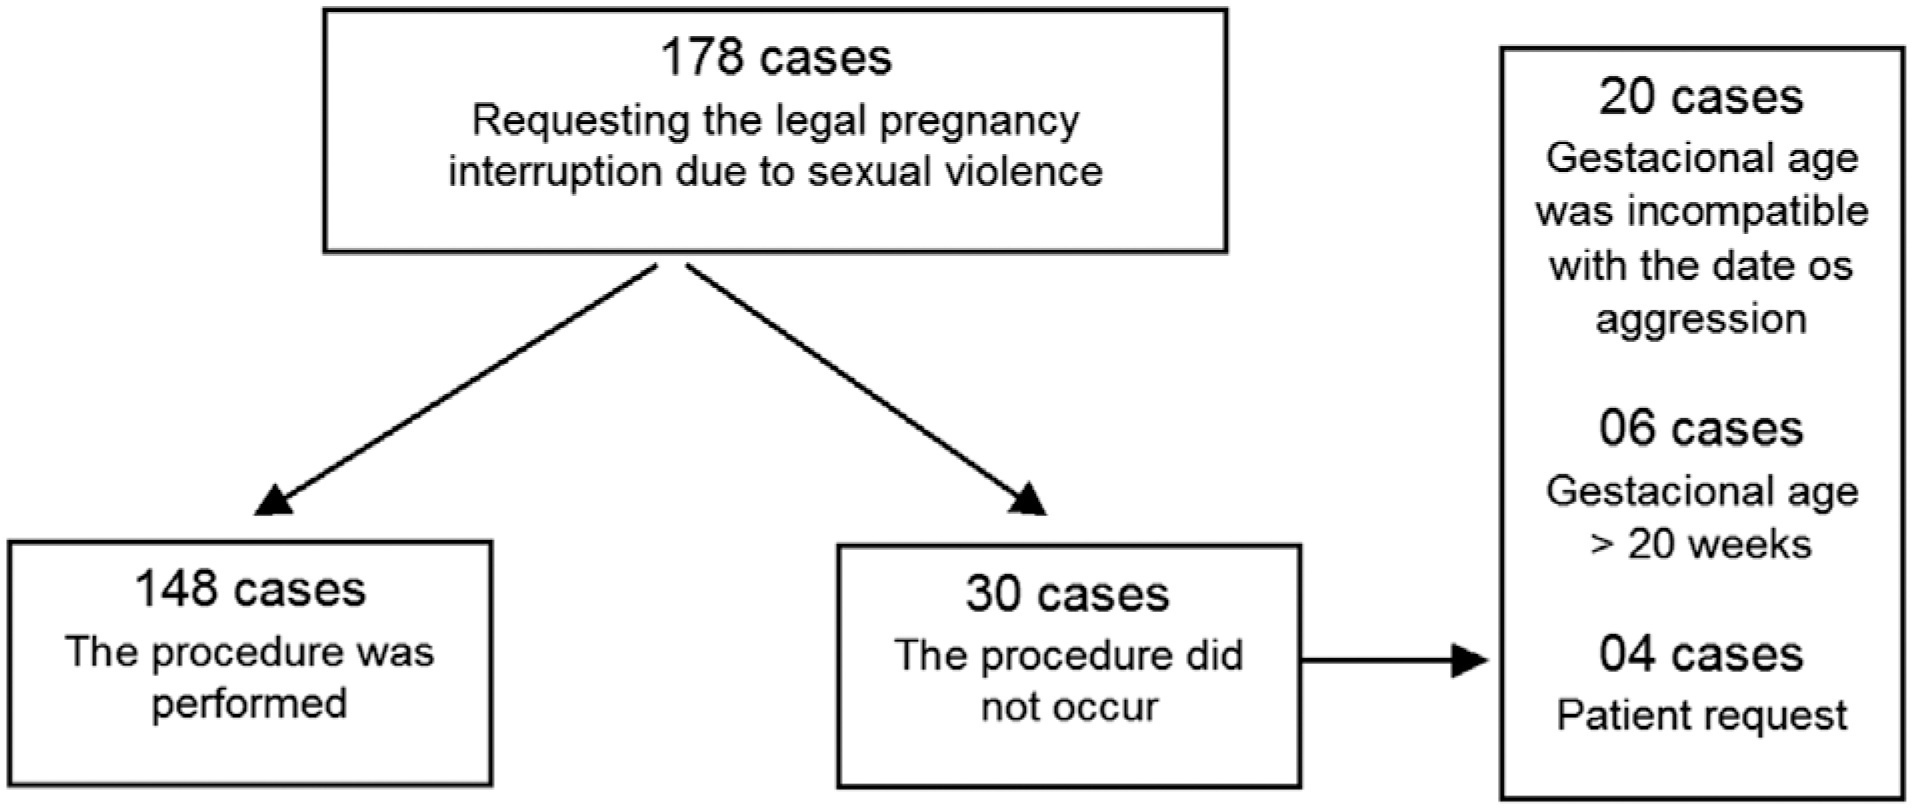 Legal Pregnancy Interruption due to Sexual Violence in a Public Hospital in the South of Brazil